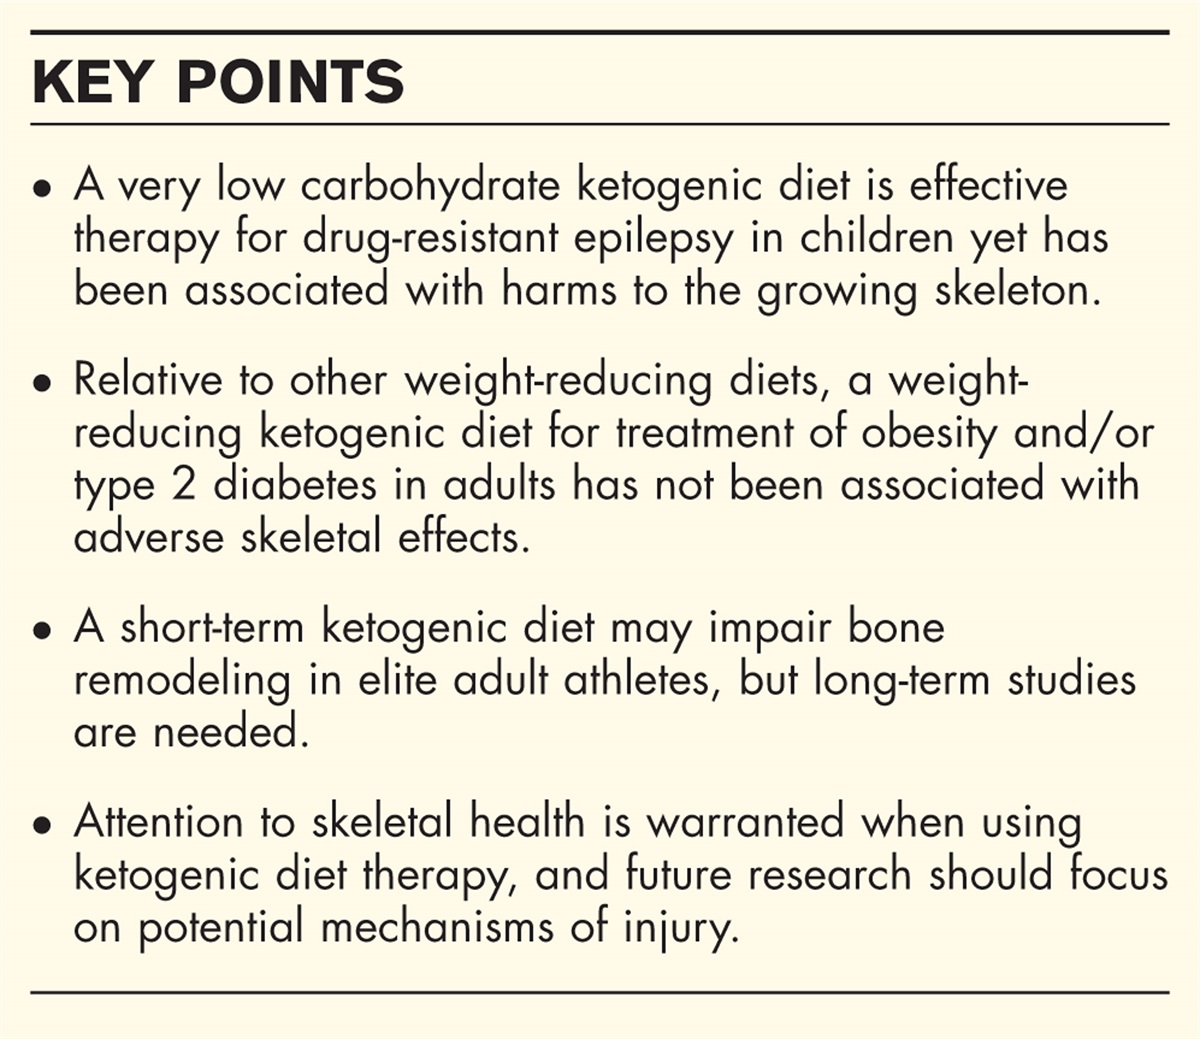 Effects of very low carbohydrate ketogenic diets on skeletal health